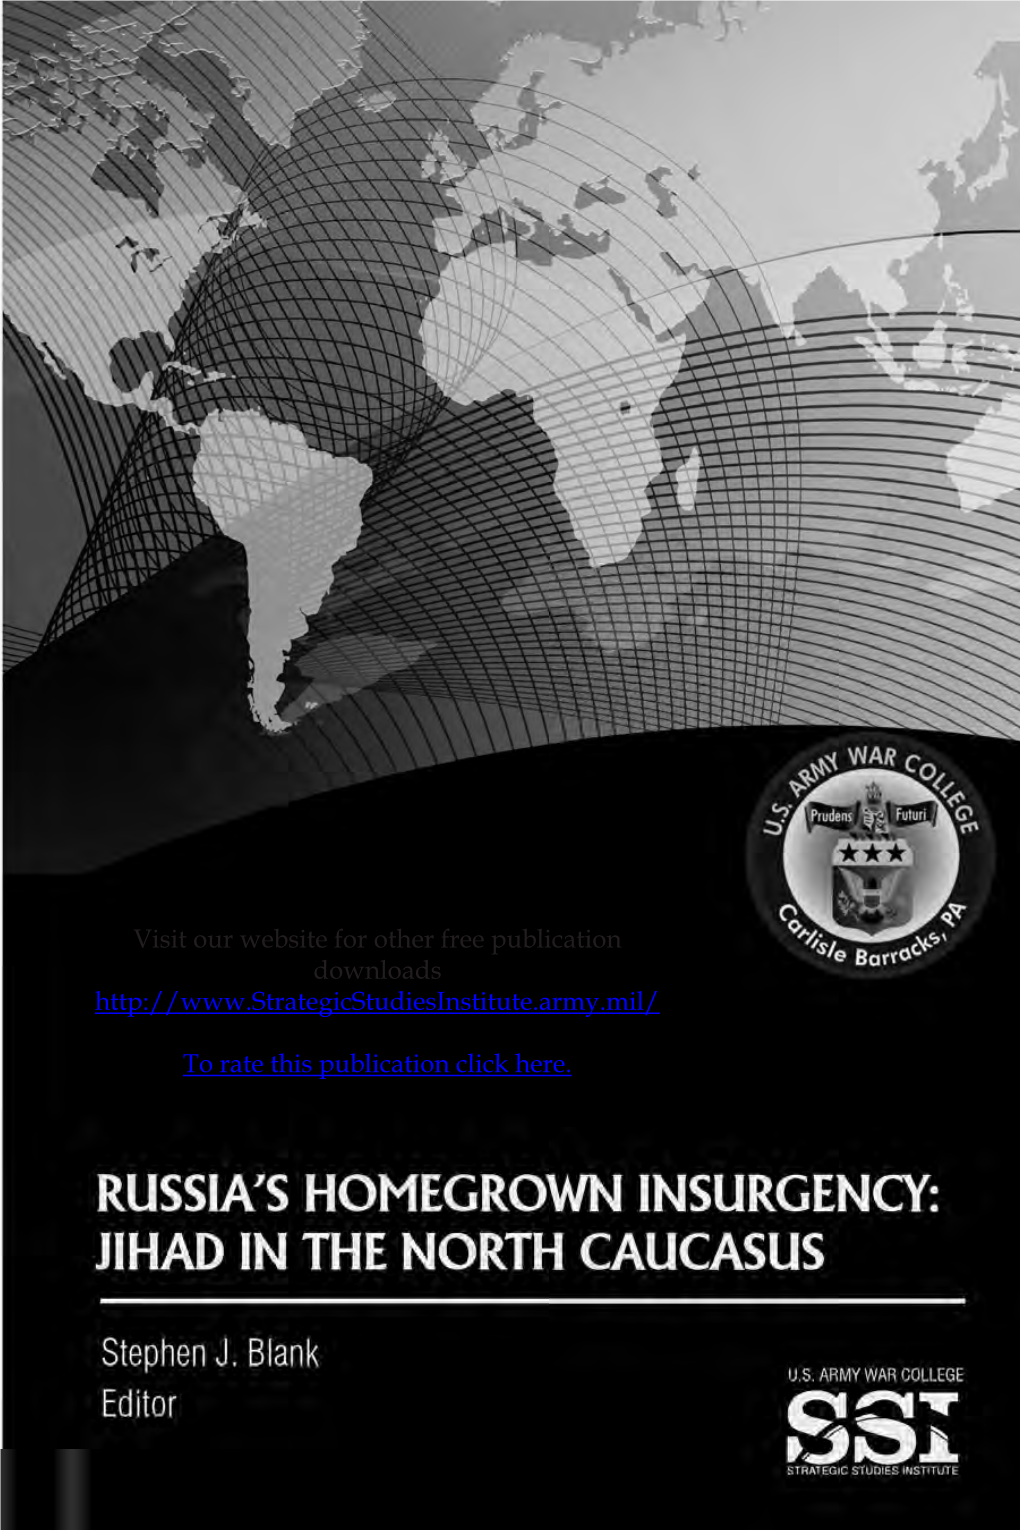 Russia's Homegrown Insurgency: Jihad in the North Caucasus